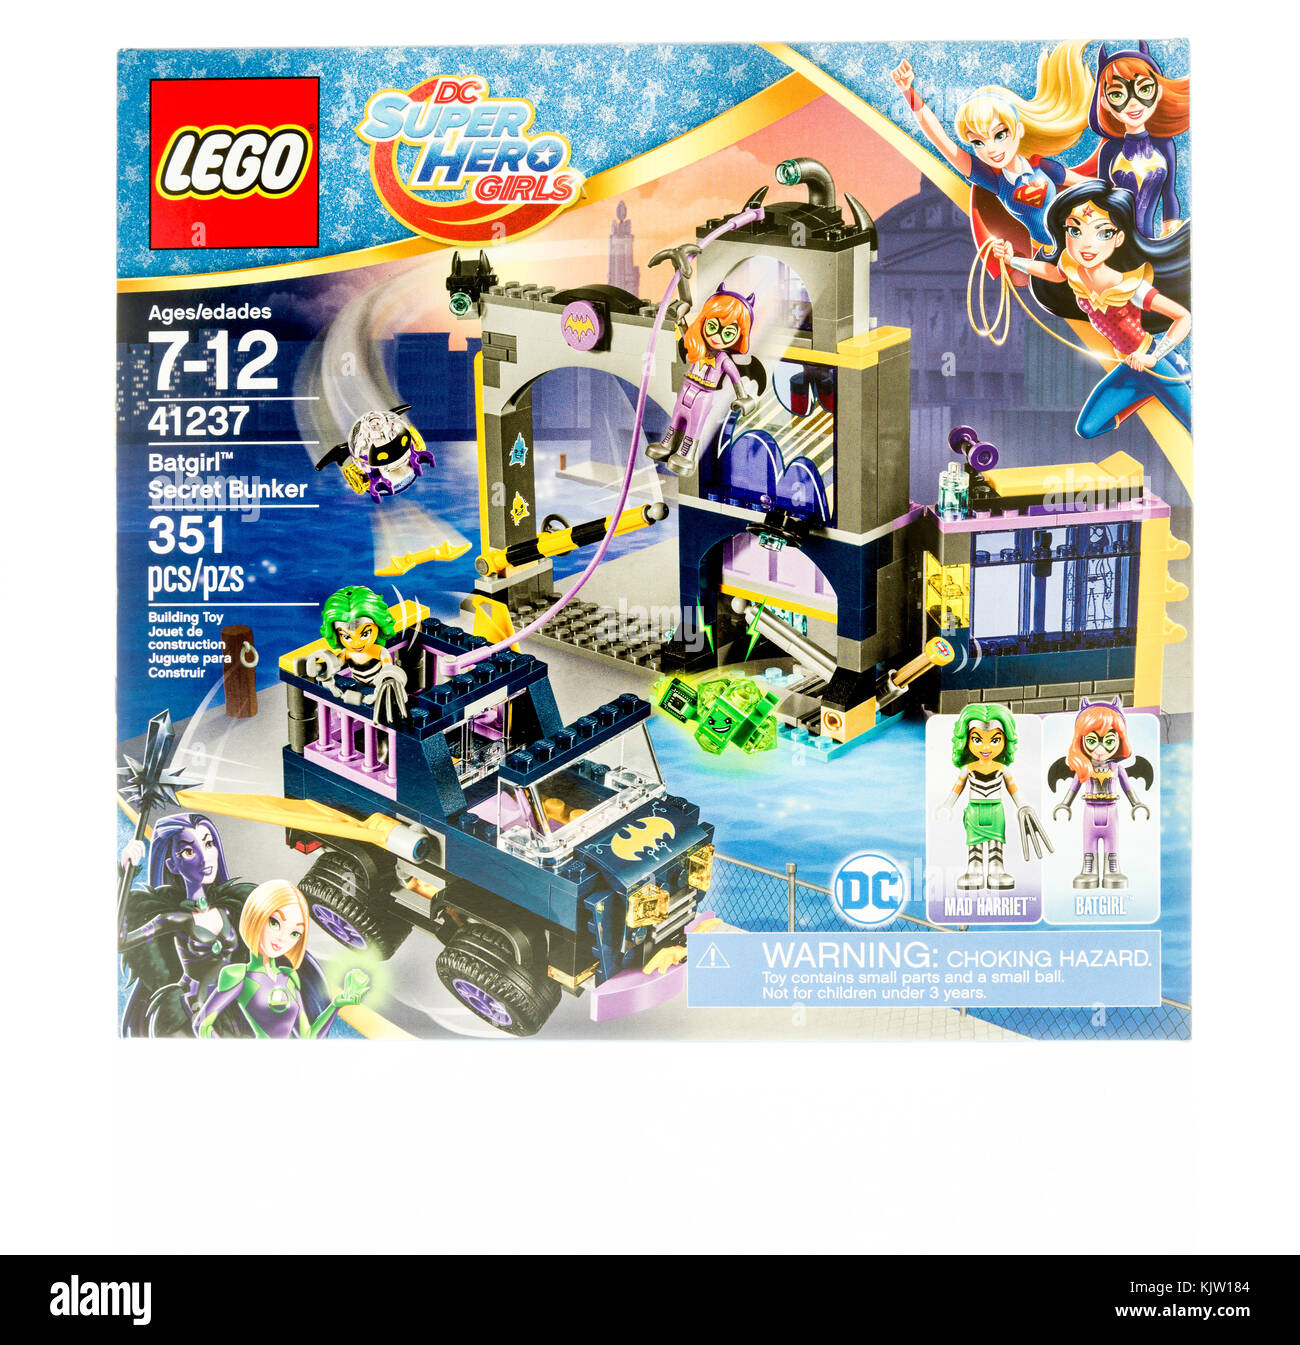 Winneconne, WI - 19 November 2017:  A box of Lego featuring DC Super Hero Girls with Batgirl in Secret Bunker on an on an isolated background. Stock Photo